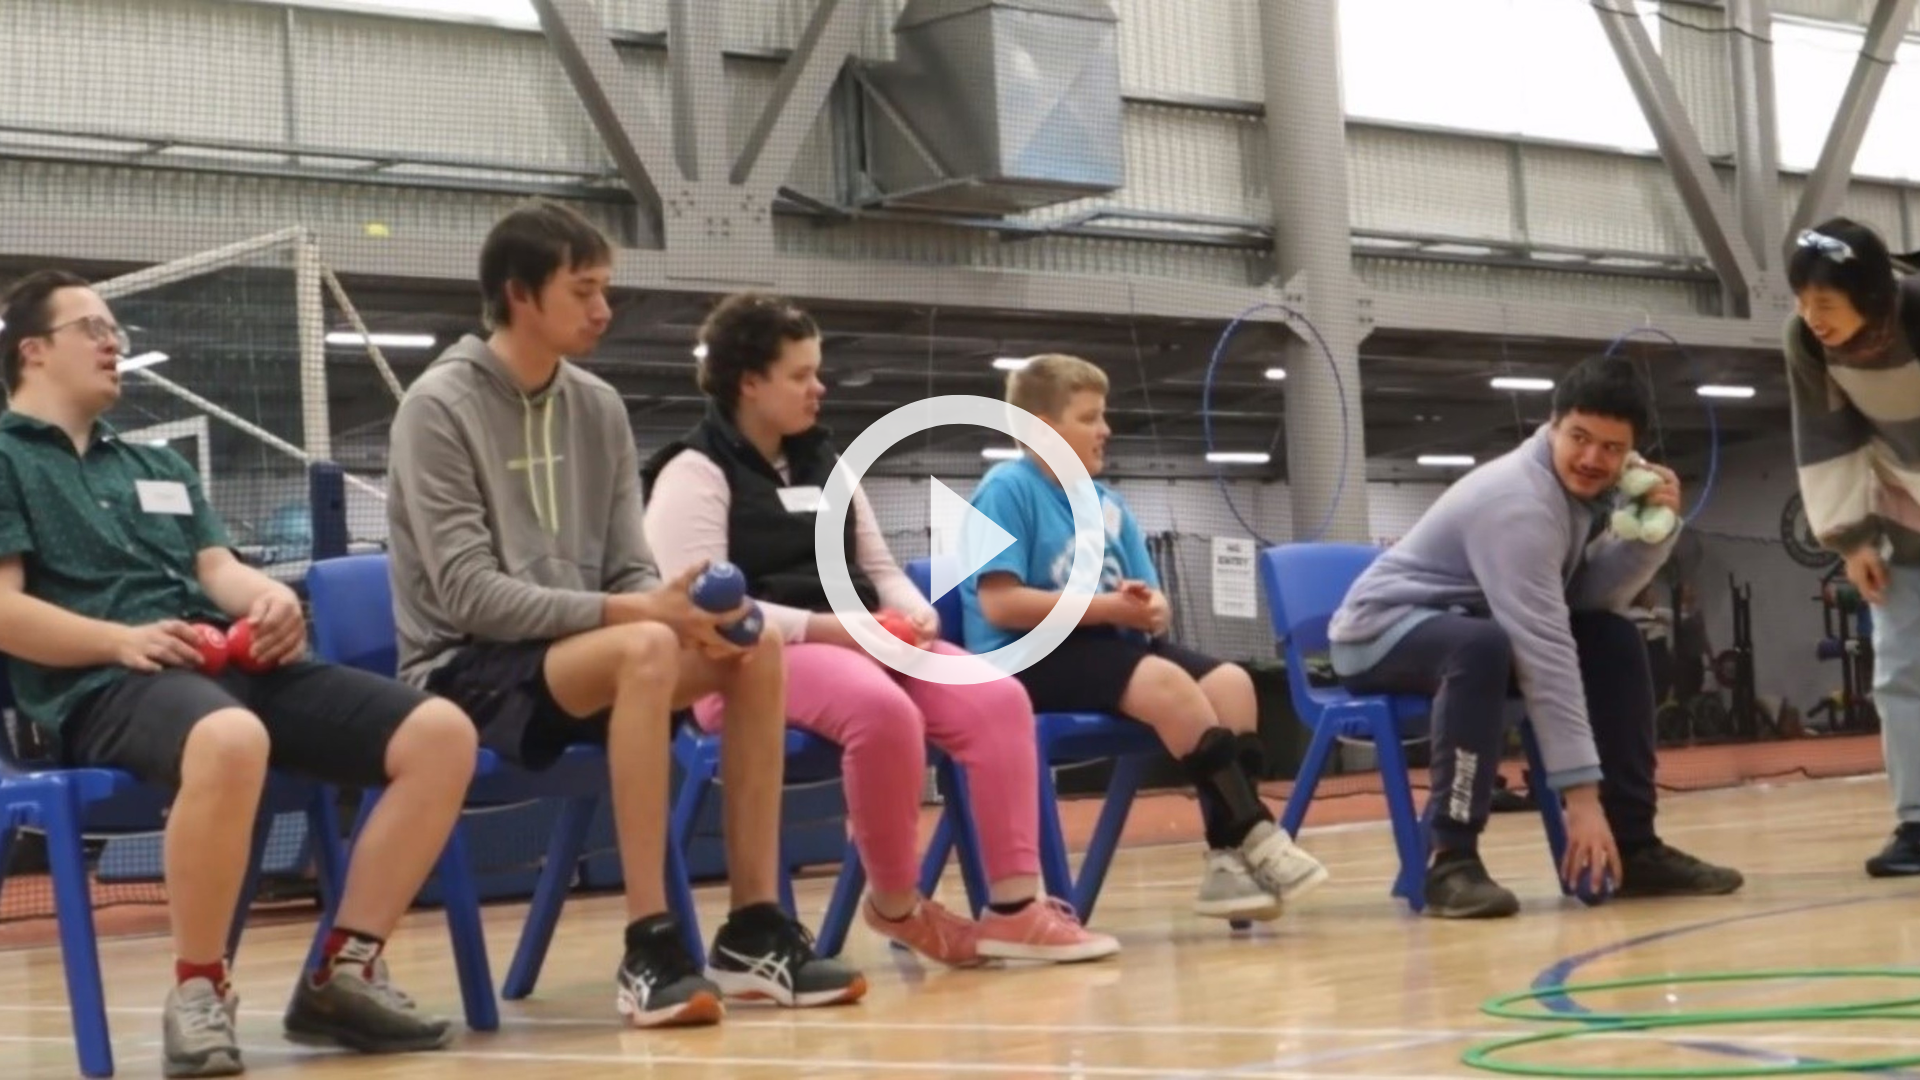 FIVE PEOPLE SITTING IN CHAIRS ON A BASKETBALL COURT